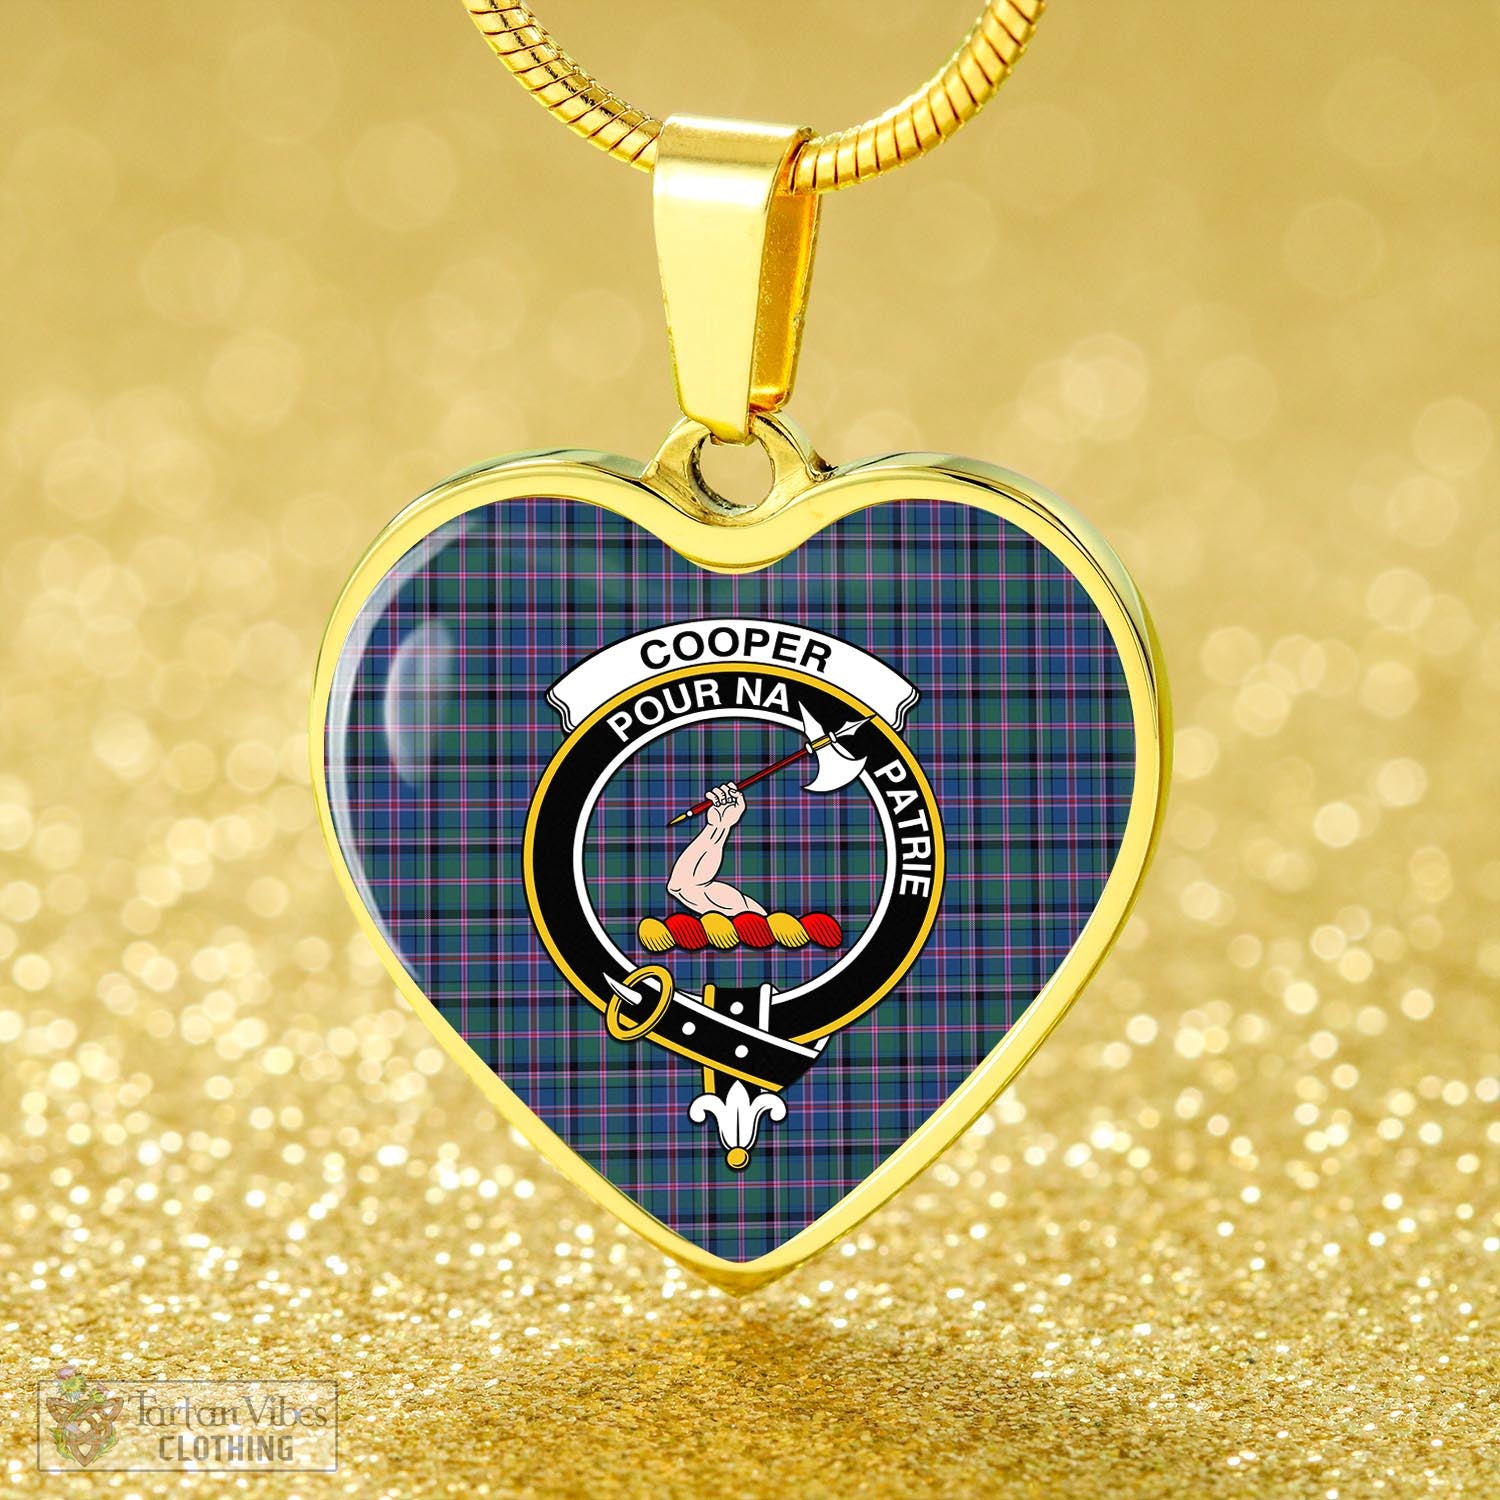 Tartan Vibes Clothing Cooper Tartan Heart Necklace with Family Crest